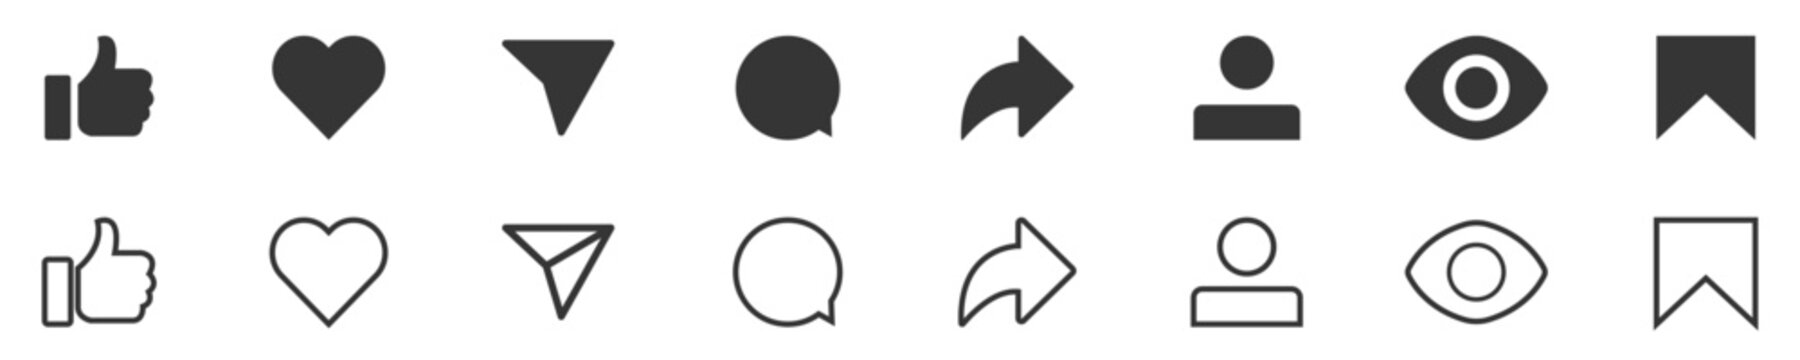 Social media network notification icons set. Post reactions symbols collection isolated on white background.